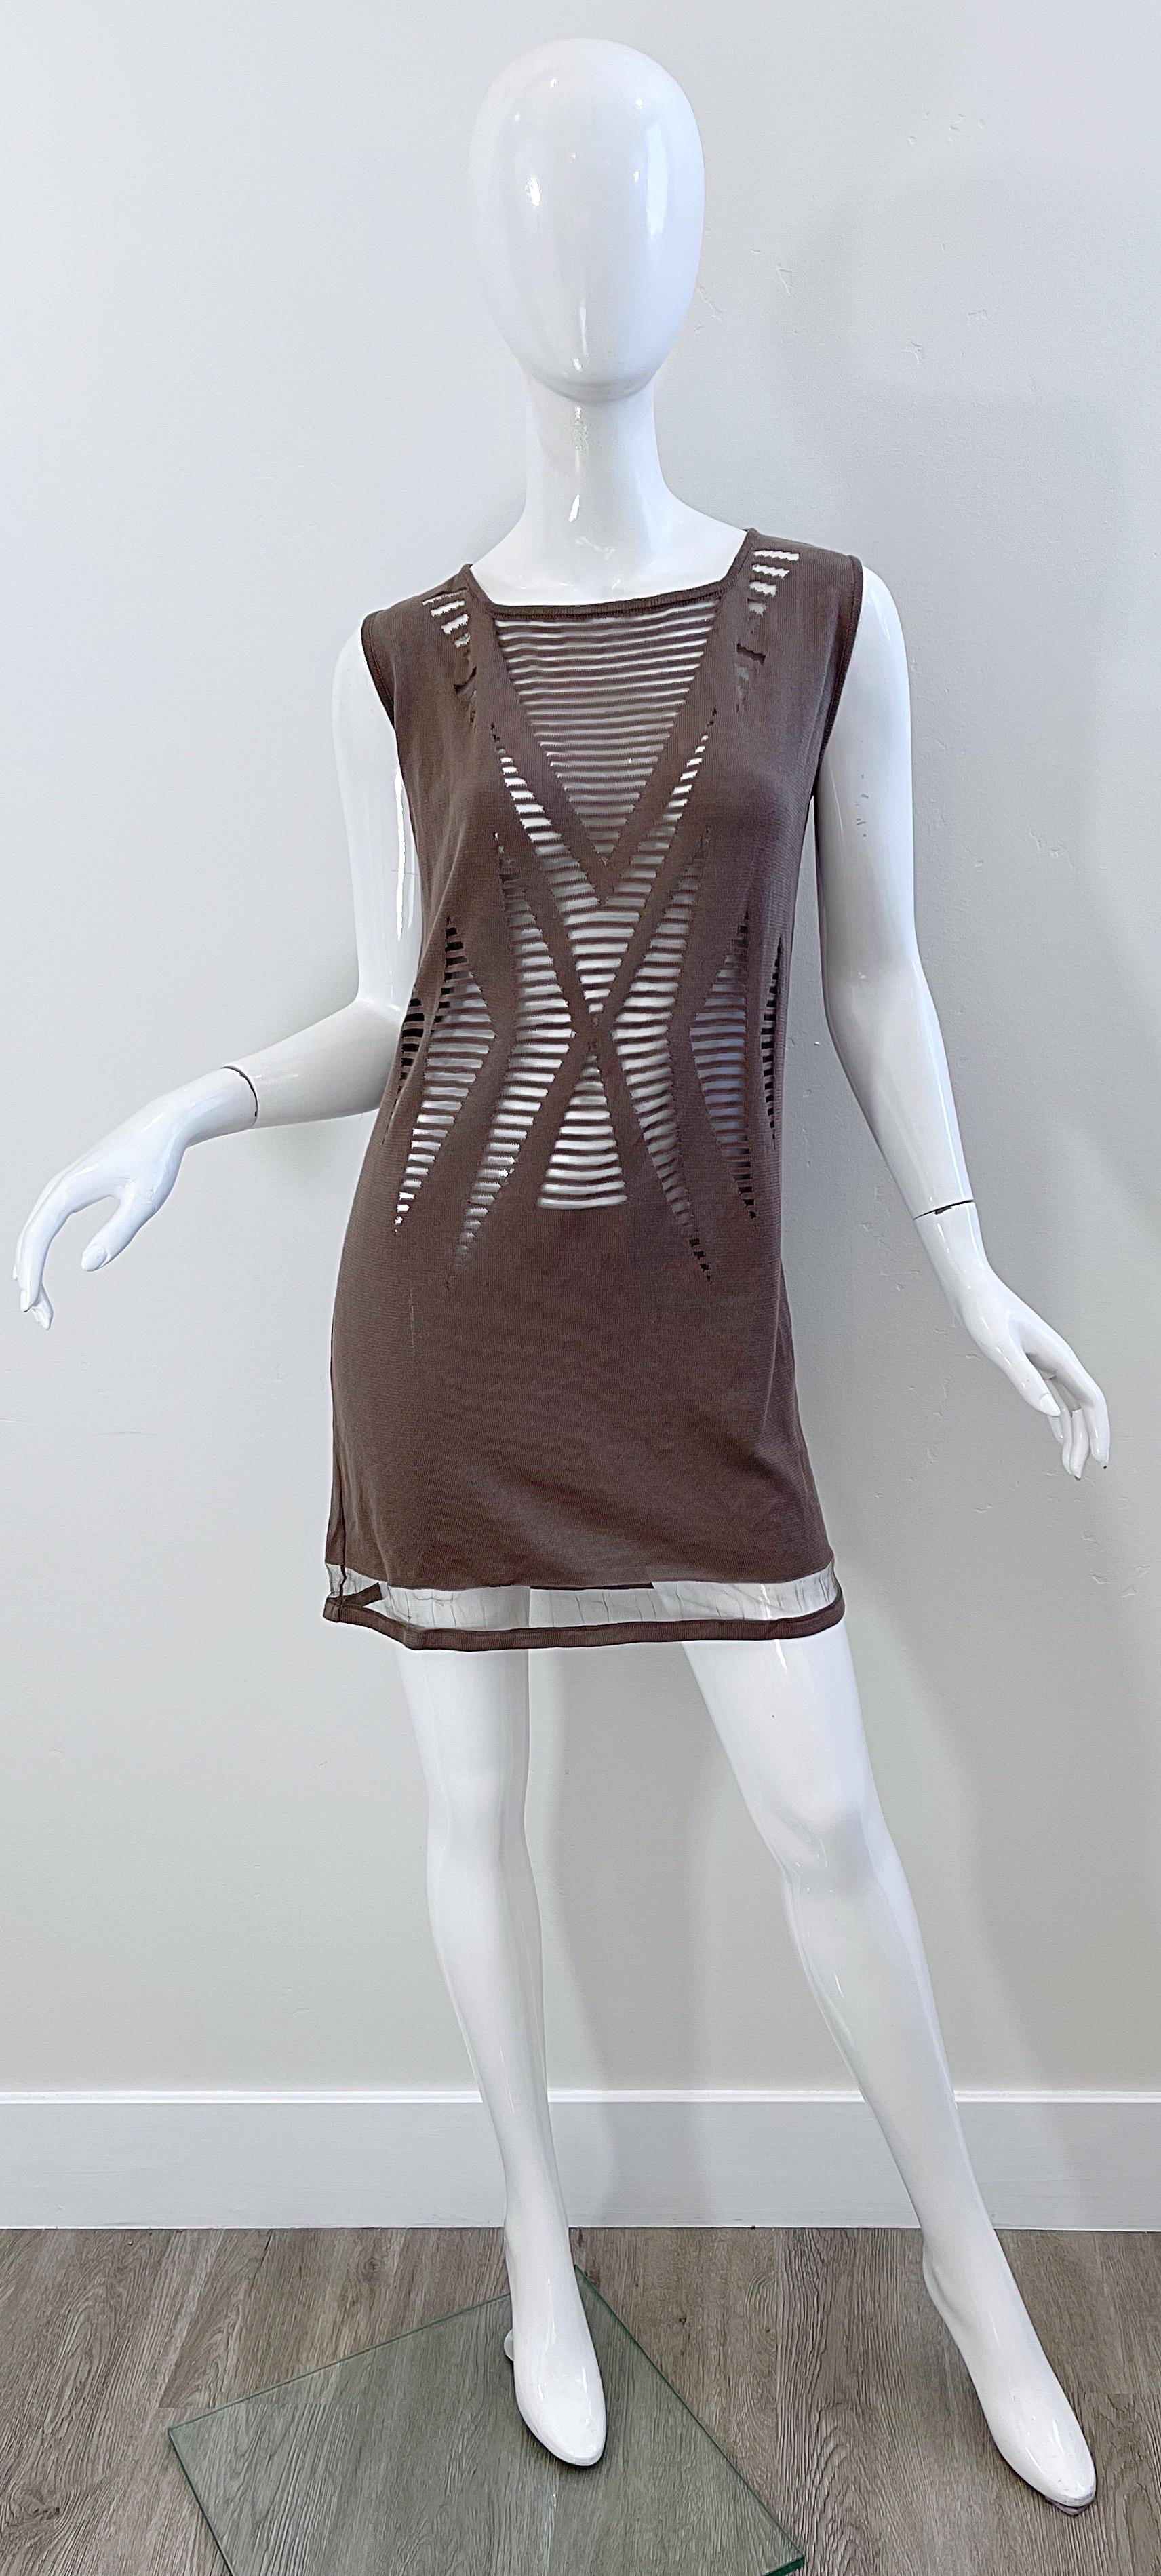 Amazing vintage deadstock 90s KRIZIA taupe knit dress ! Features sheer panels covered with mesh throughout. Simply slips over the head and stretches to fit. Soft Cotton (90%) and Nylon (10%) fabric. Great alone or layered over a slip. Would even be